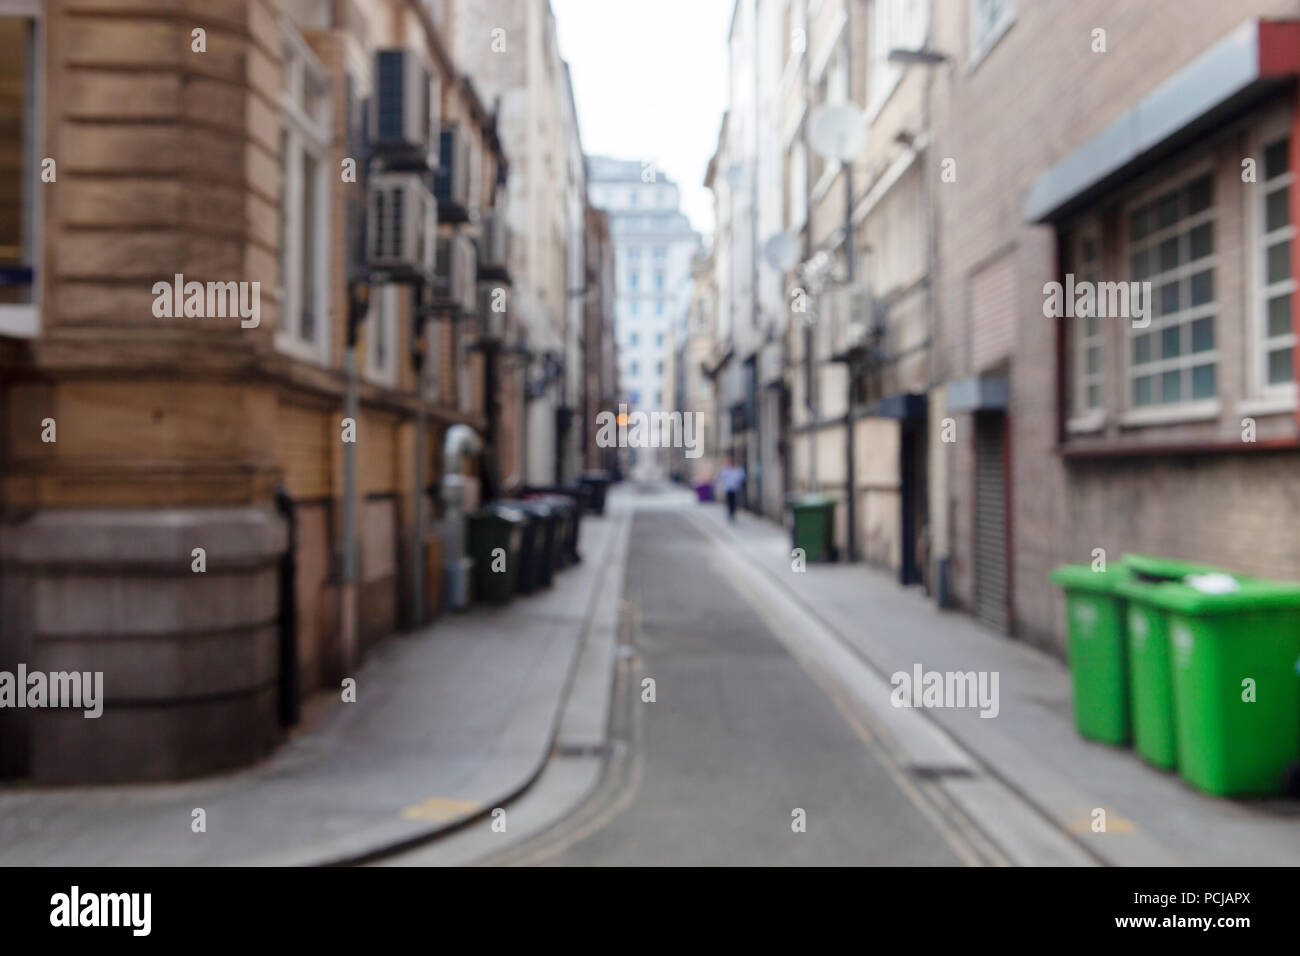 Blurred view of London dirty back street with shops, trash cans and buildings. Can be used as background Stock Photo